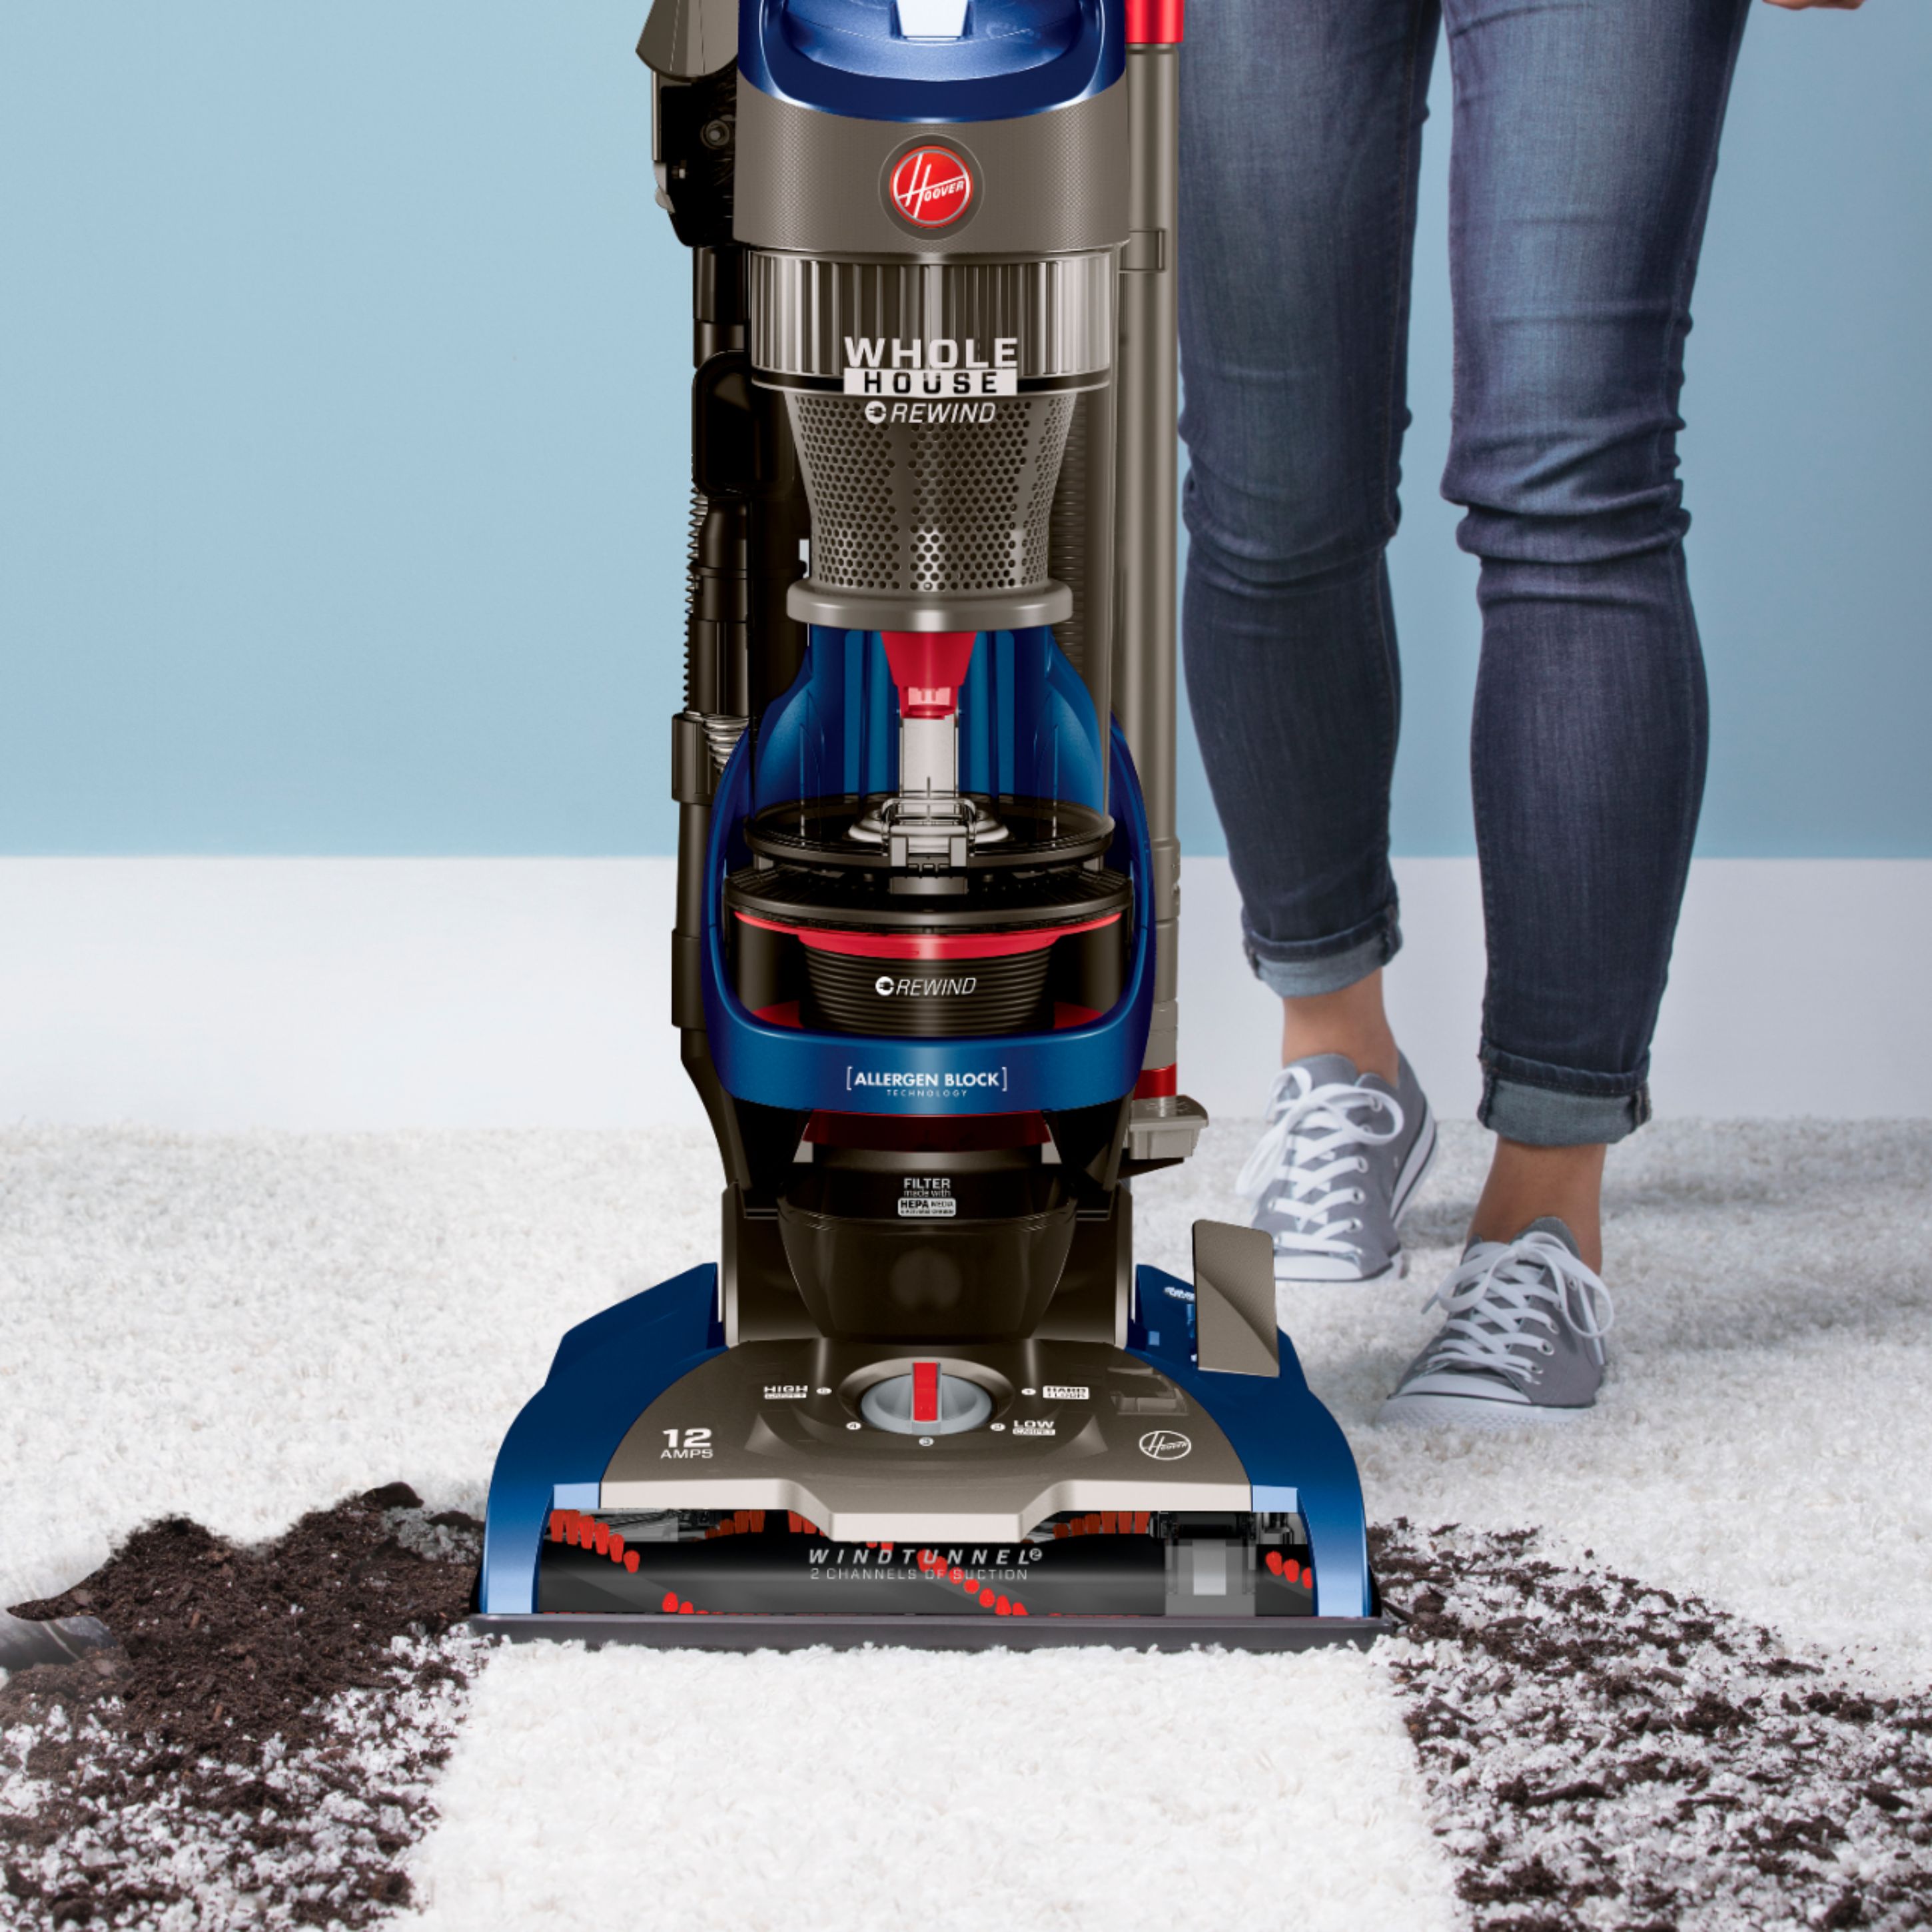 Hoover WindTunnel 2 Blue Whole House Rewind Upright Vacuum Cleaner 